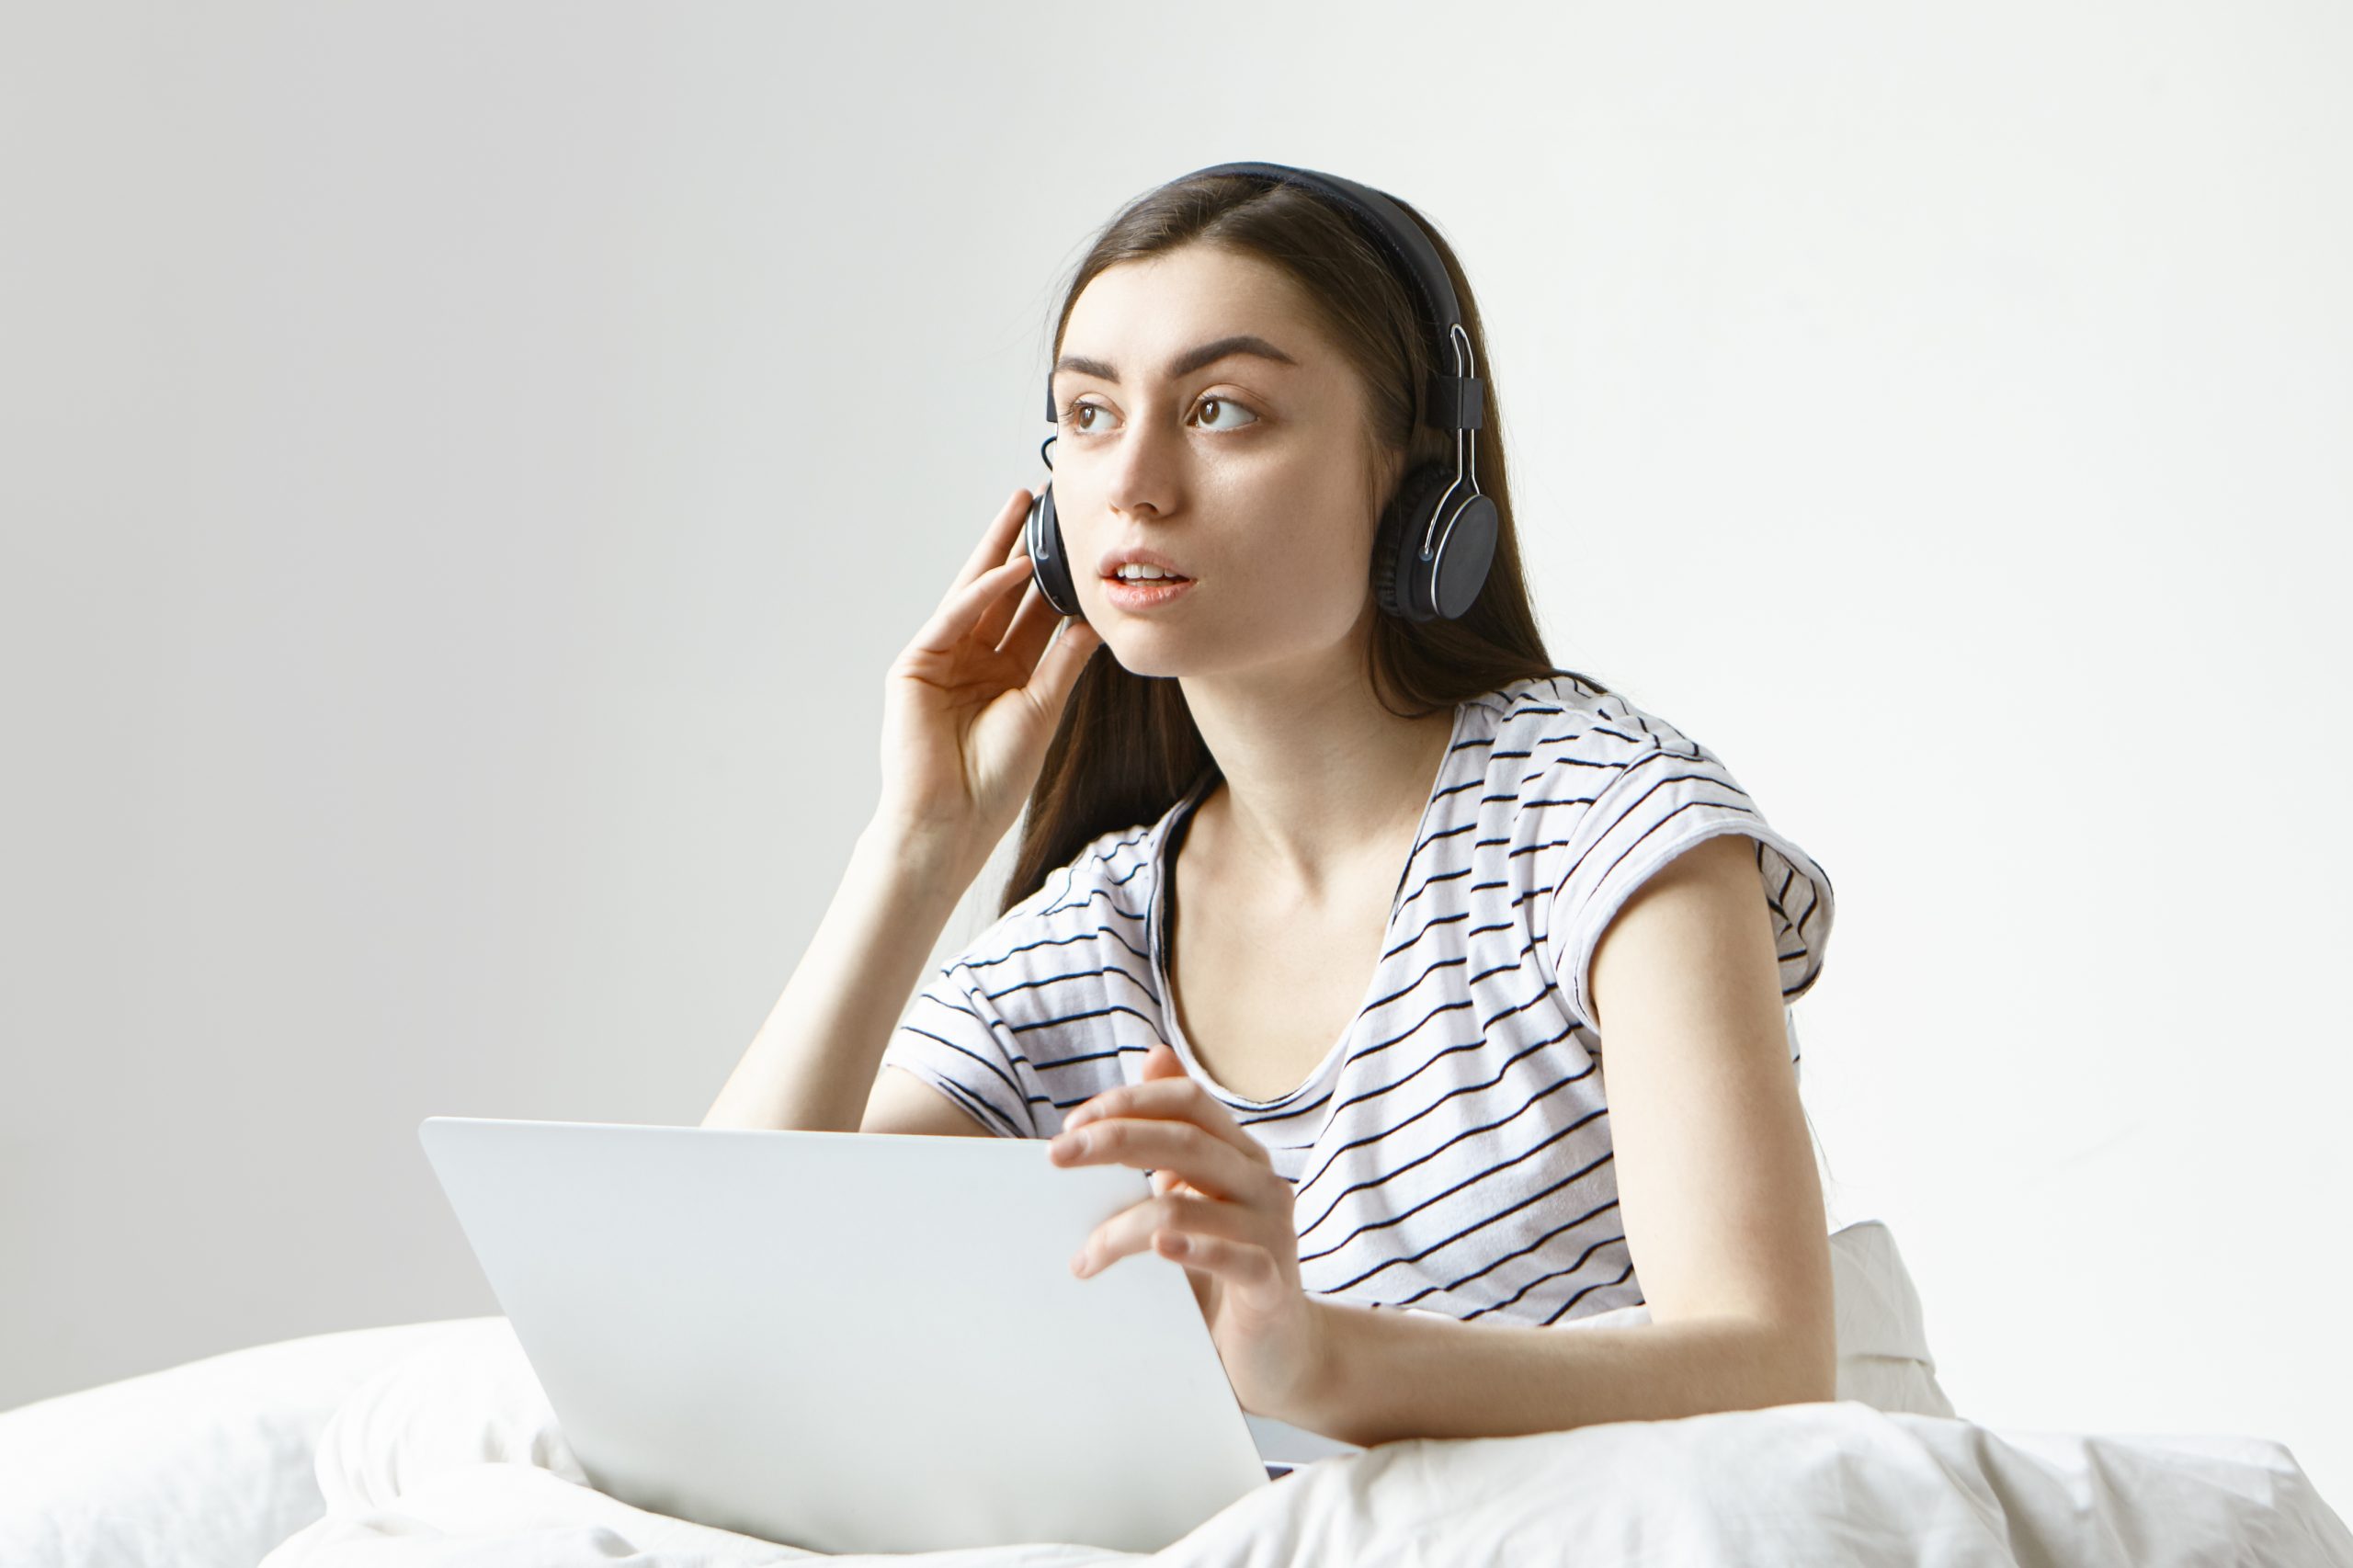 Cute young female translator working remotely from home, sitting on white bed with portable computer, listening attentively to audio file using wireless headphones, having focused serious look